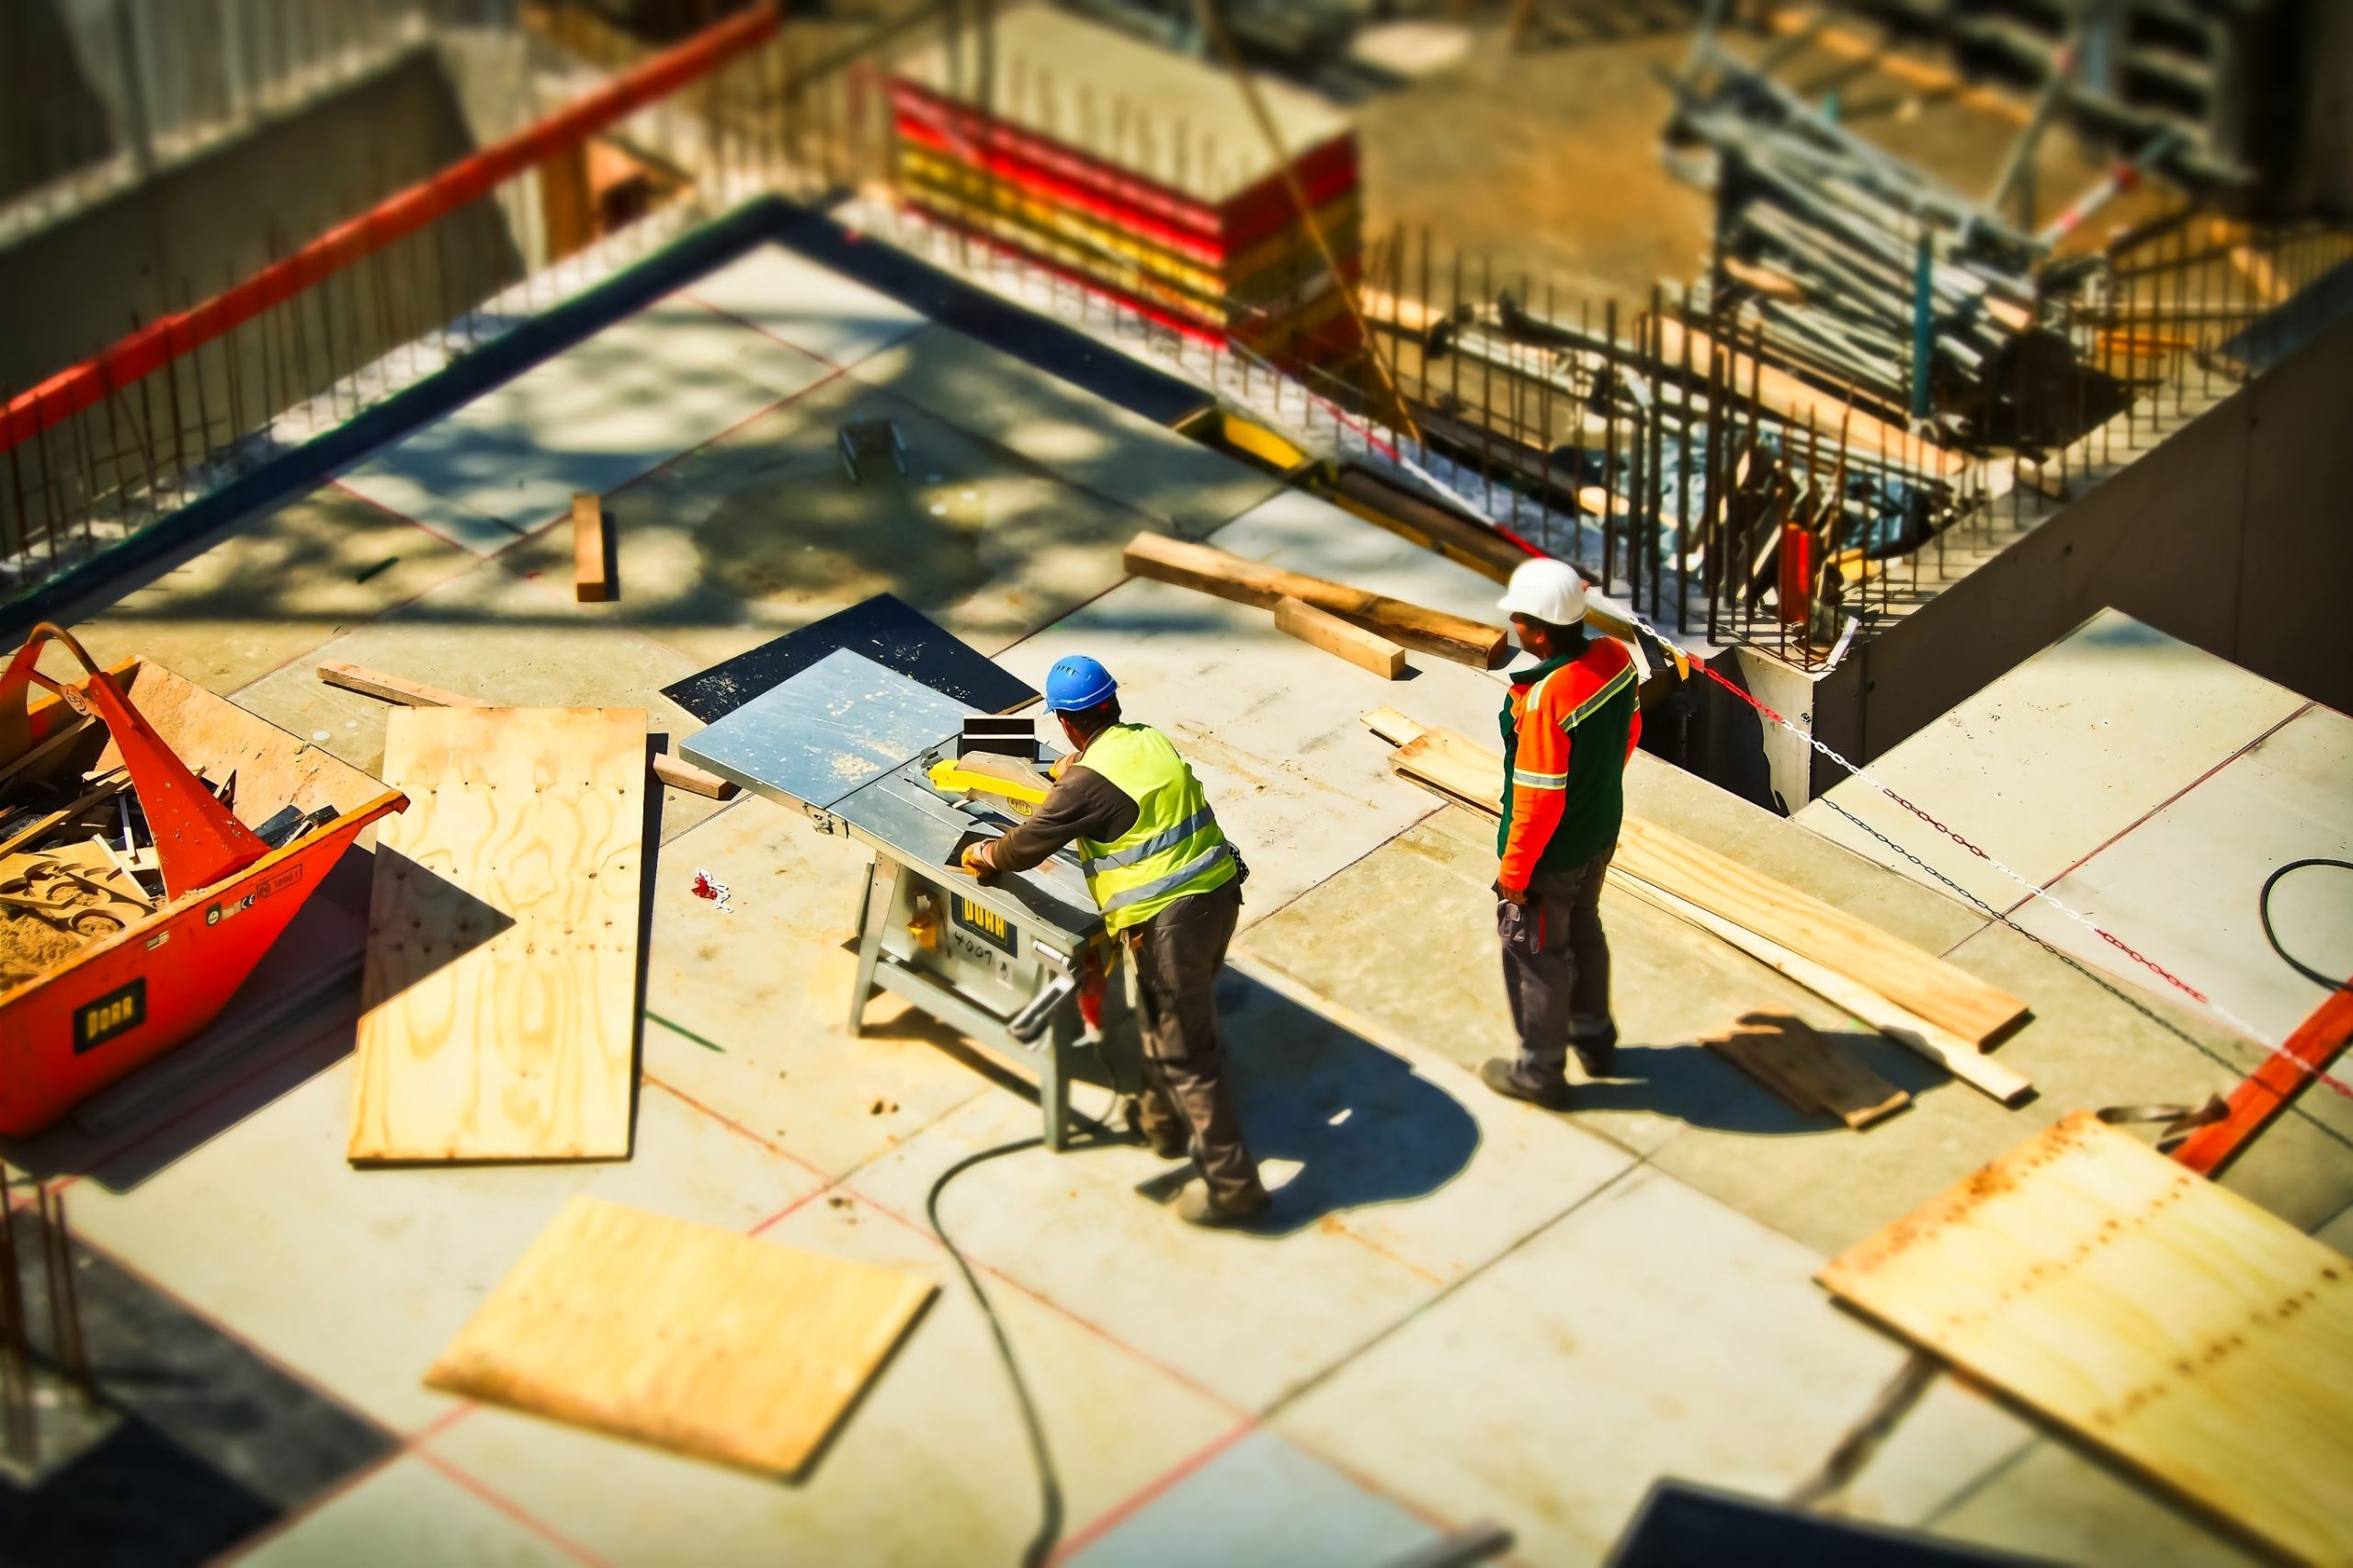 A birds eye image of two construction workers.